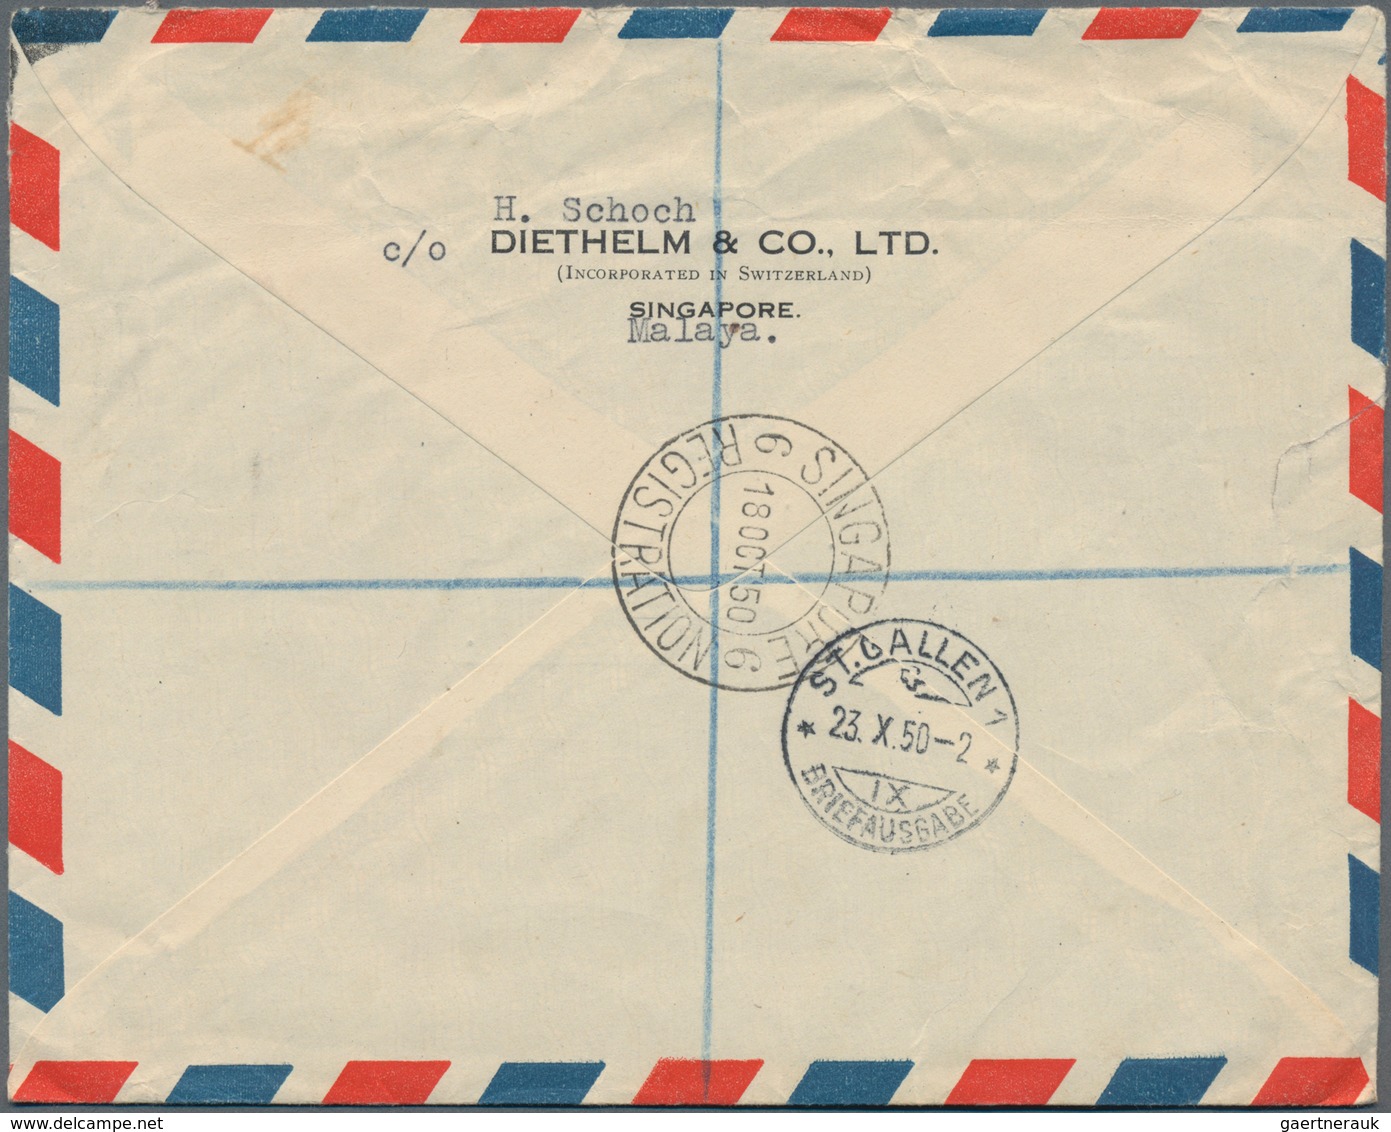 Singapur: 1949-50 Four airmail envelopes from Singapore to St. Gallen, Switzerland including three r